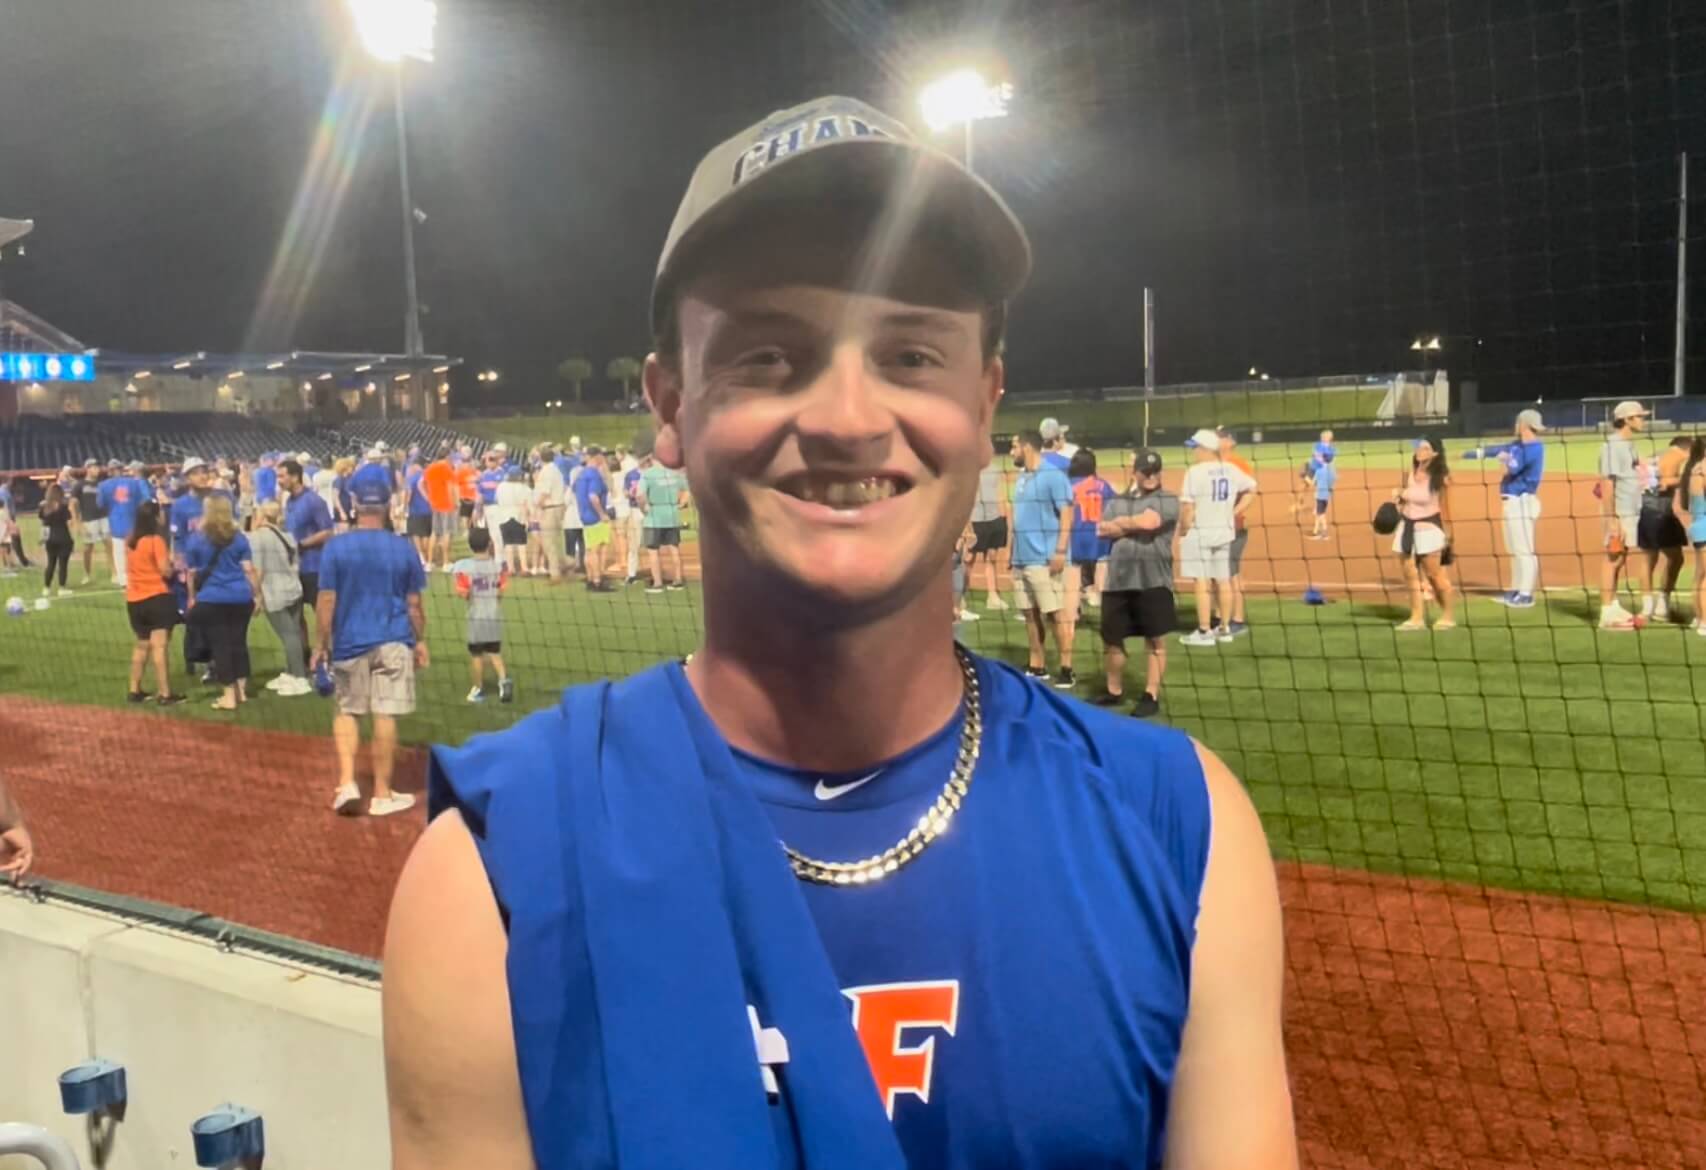 EXCLUSIVE VIDEO Gator baseball players and coaches react to reaching